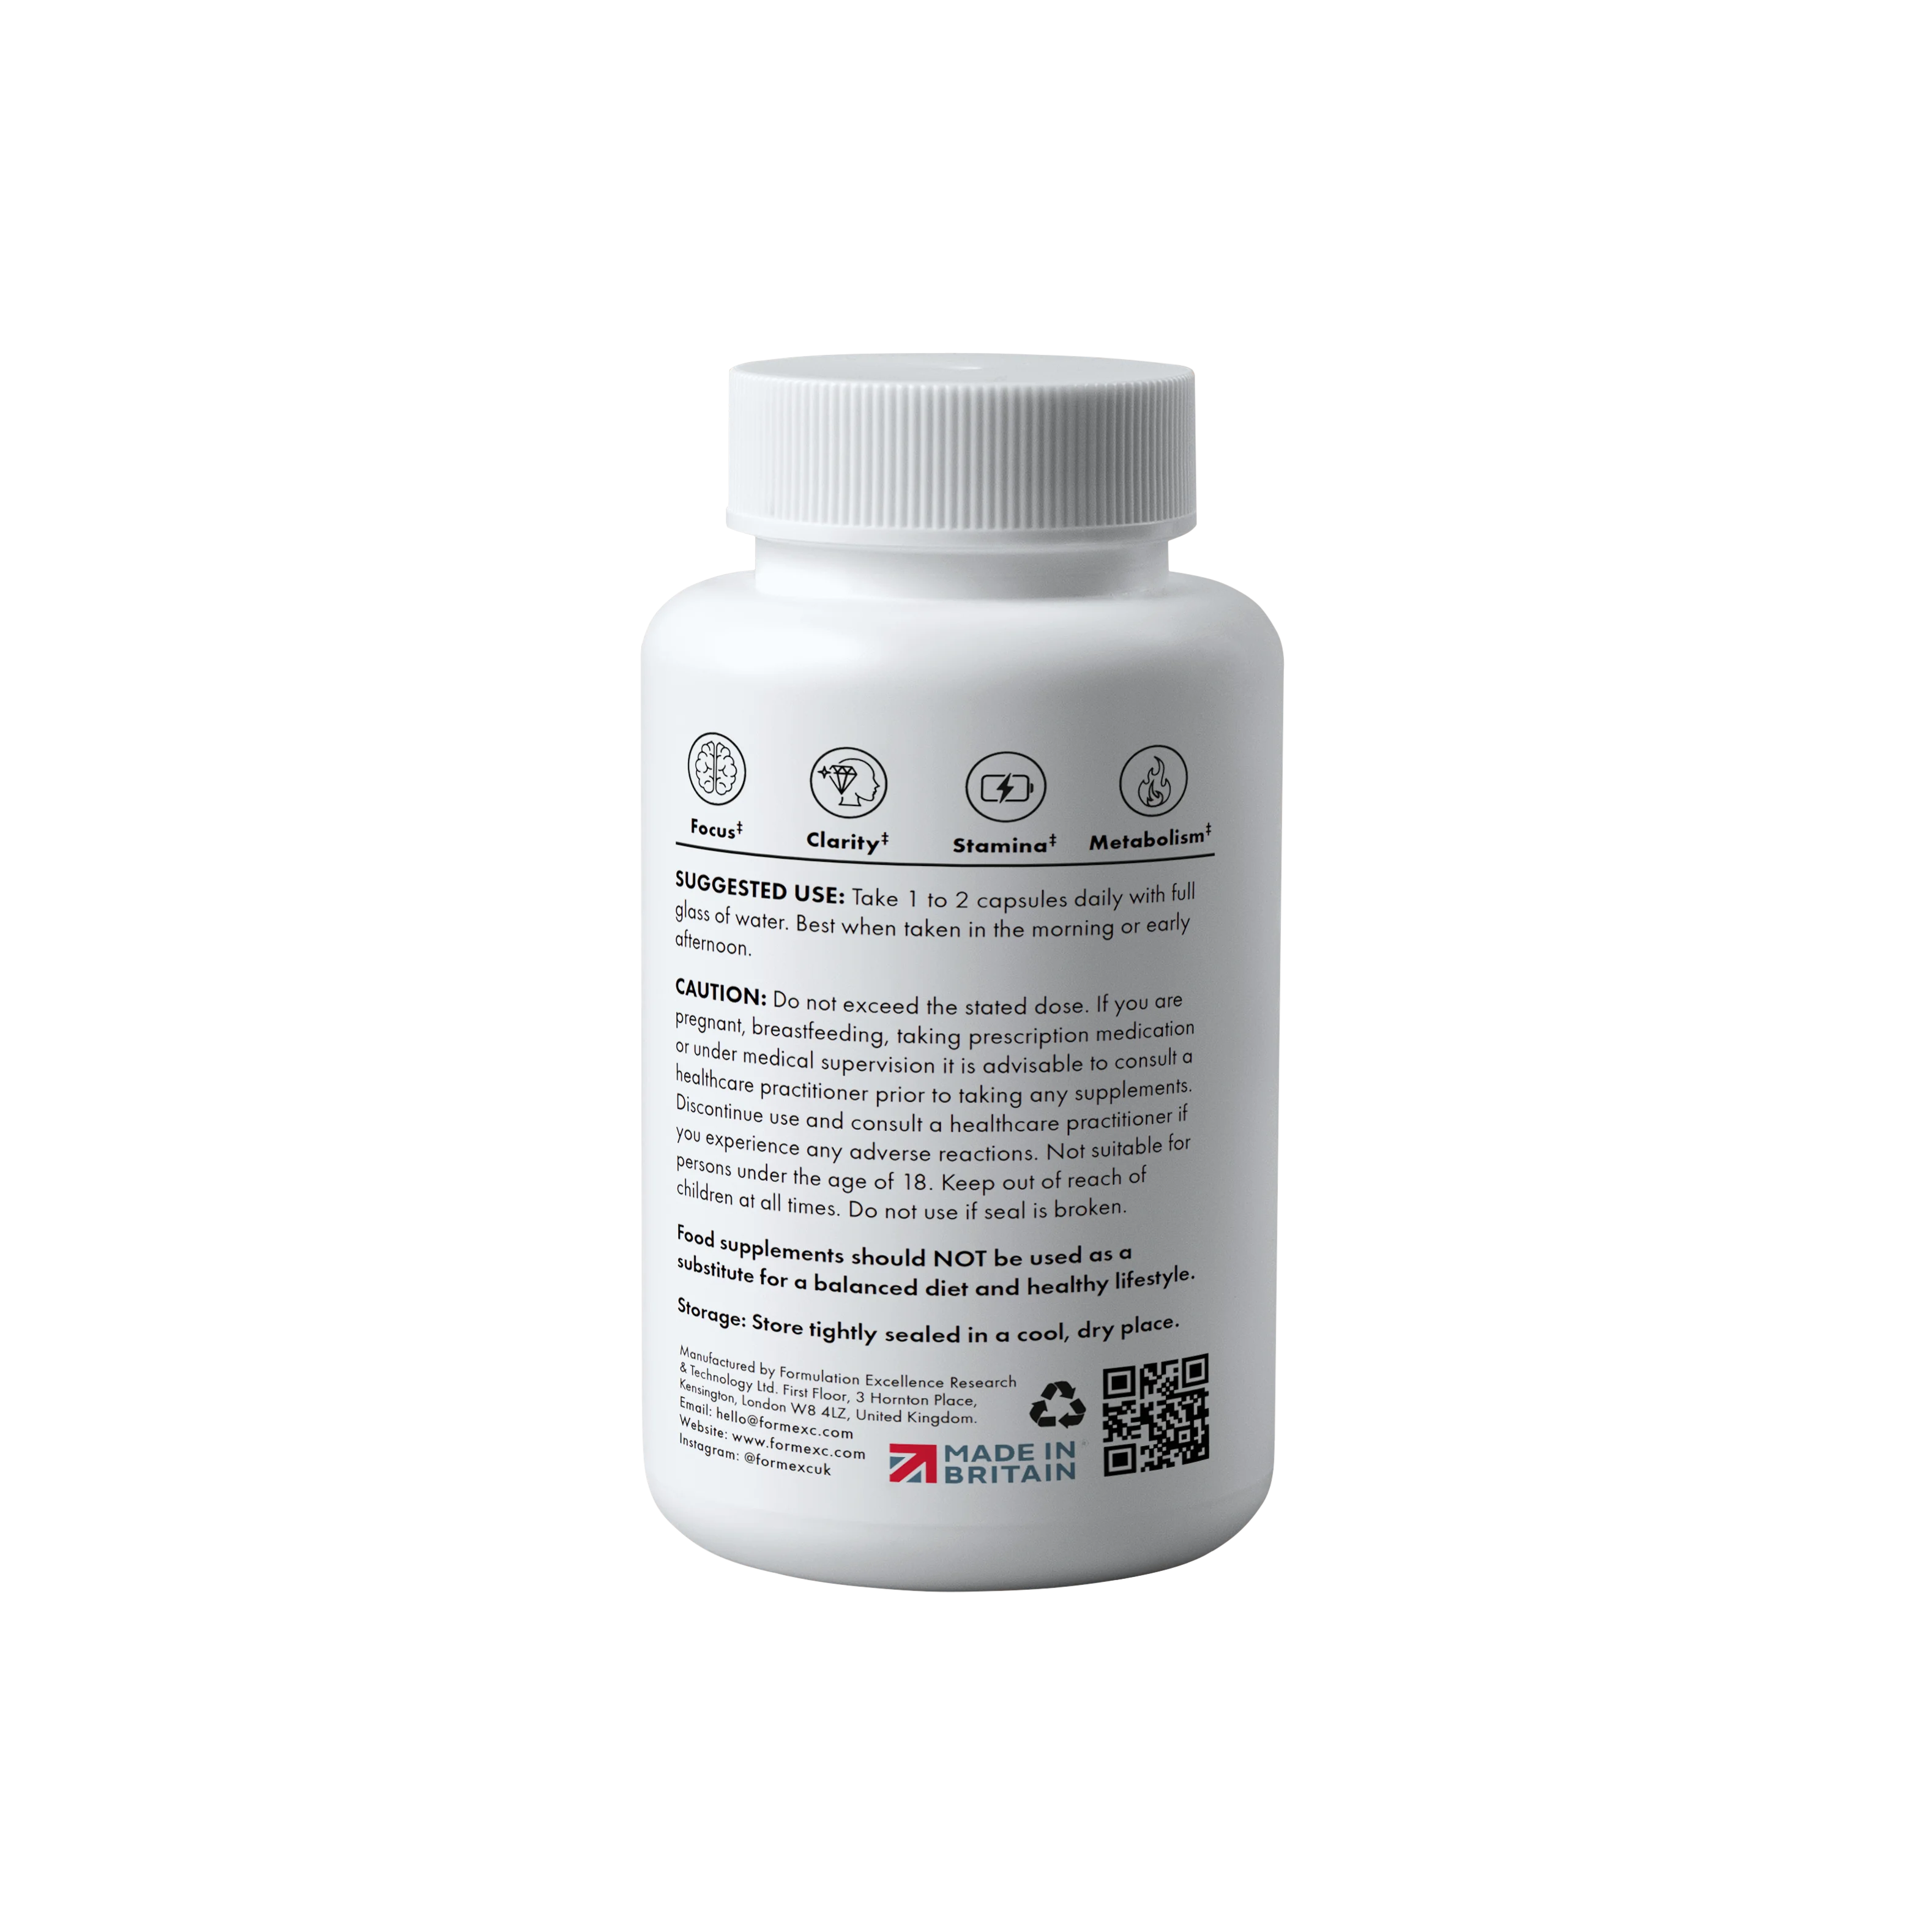 Formexc PERFORM uses organic mushrooms, vitamins and minerals to improve physical and cognitive performance.